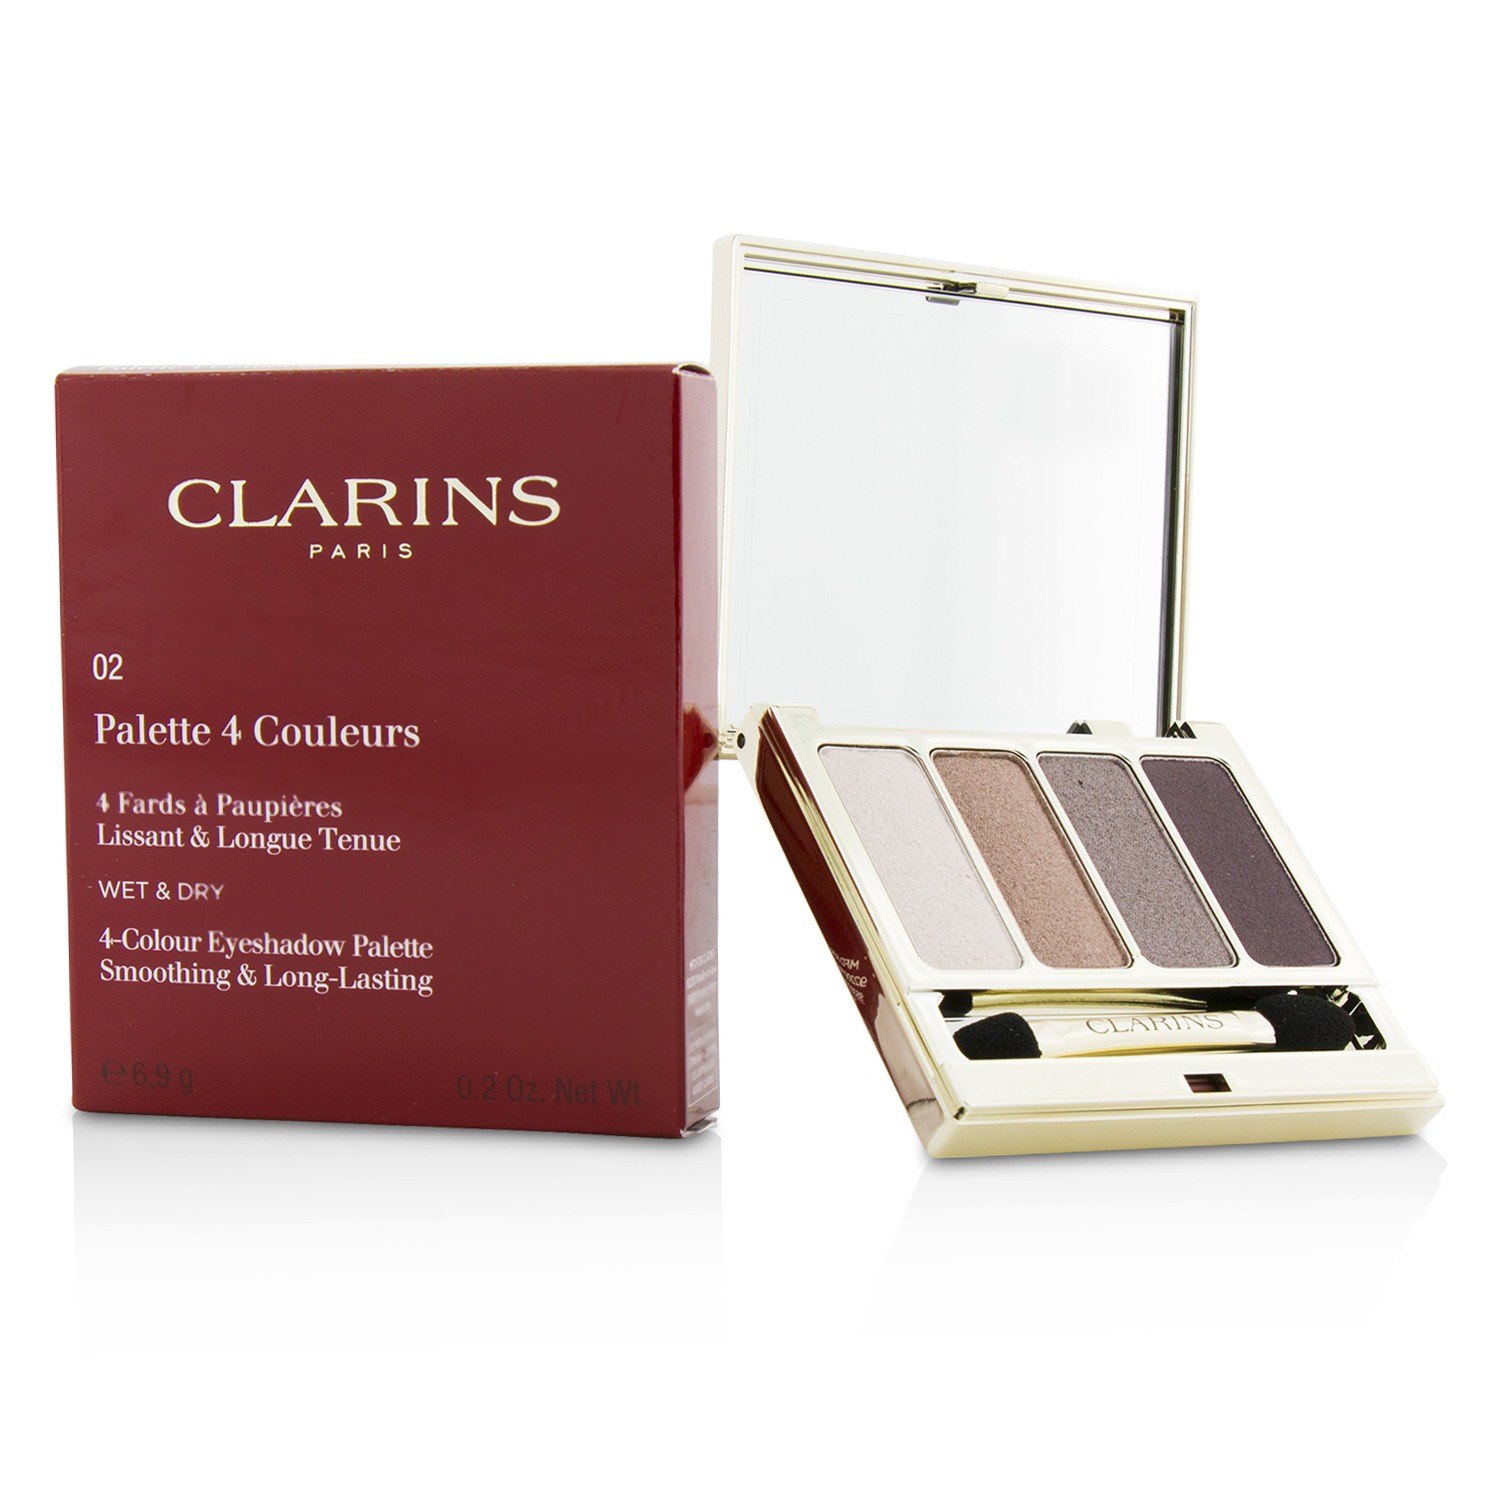 4 Colour Eyeshadow Palette (Smoothing & Long Lasting) - #02 Rosewood Clarins Image